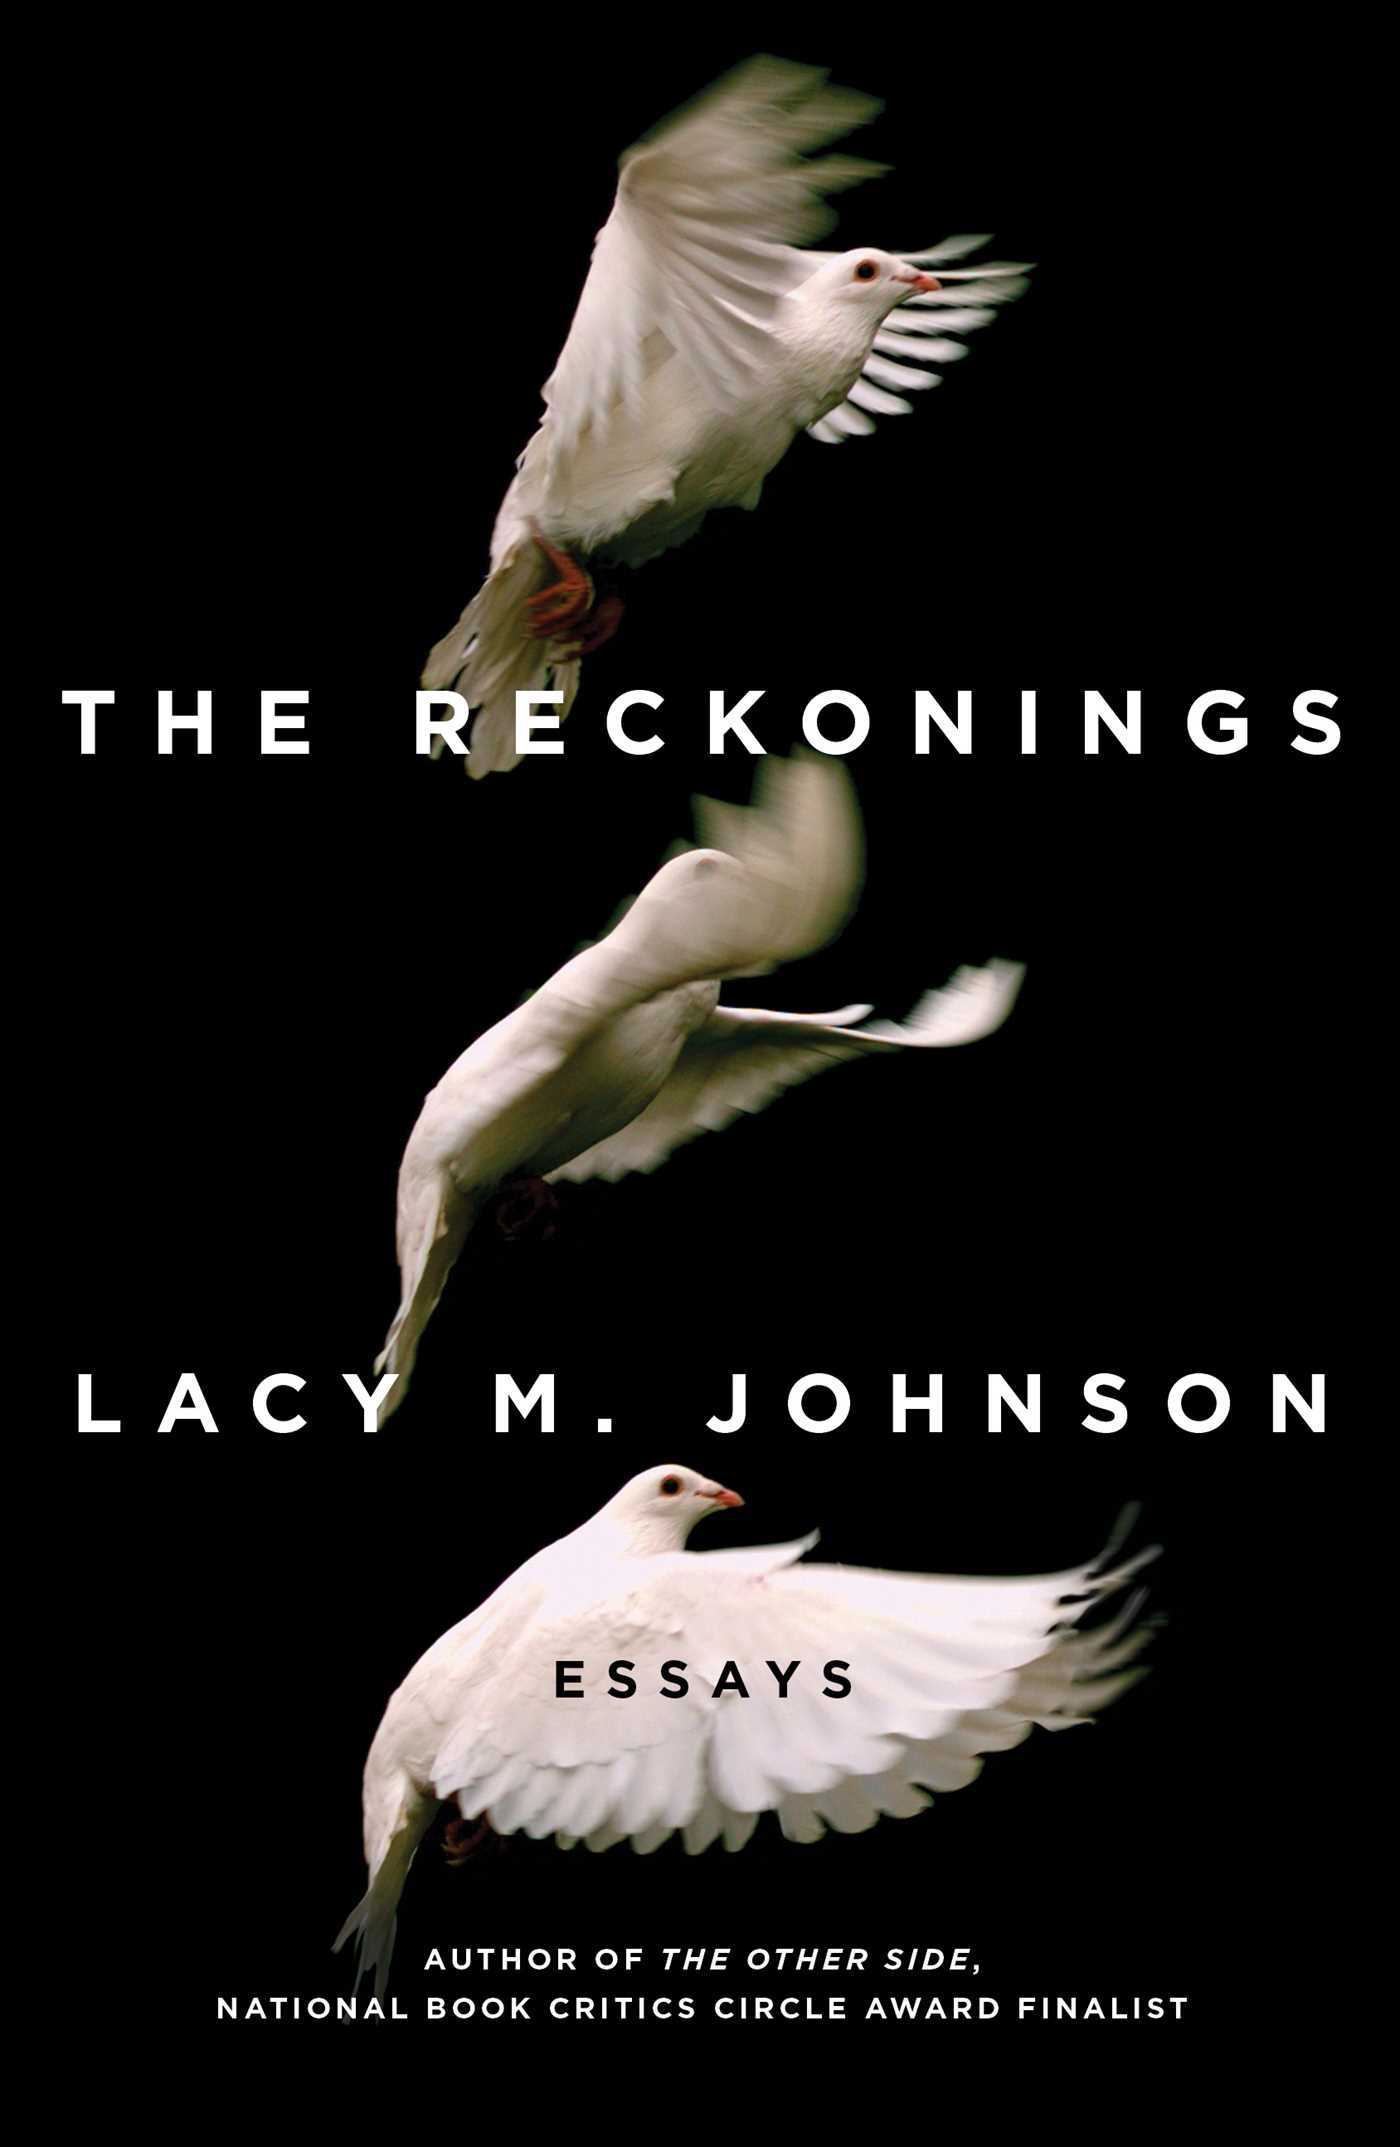 Lacy M. Johnson writes a new book of essays about hot-button topics